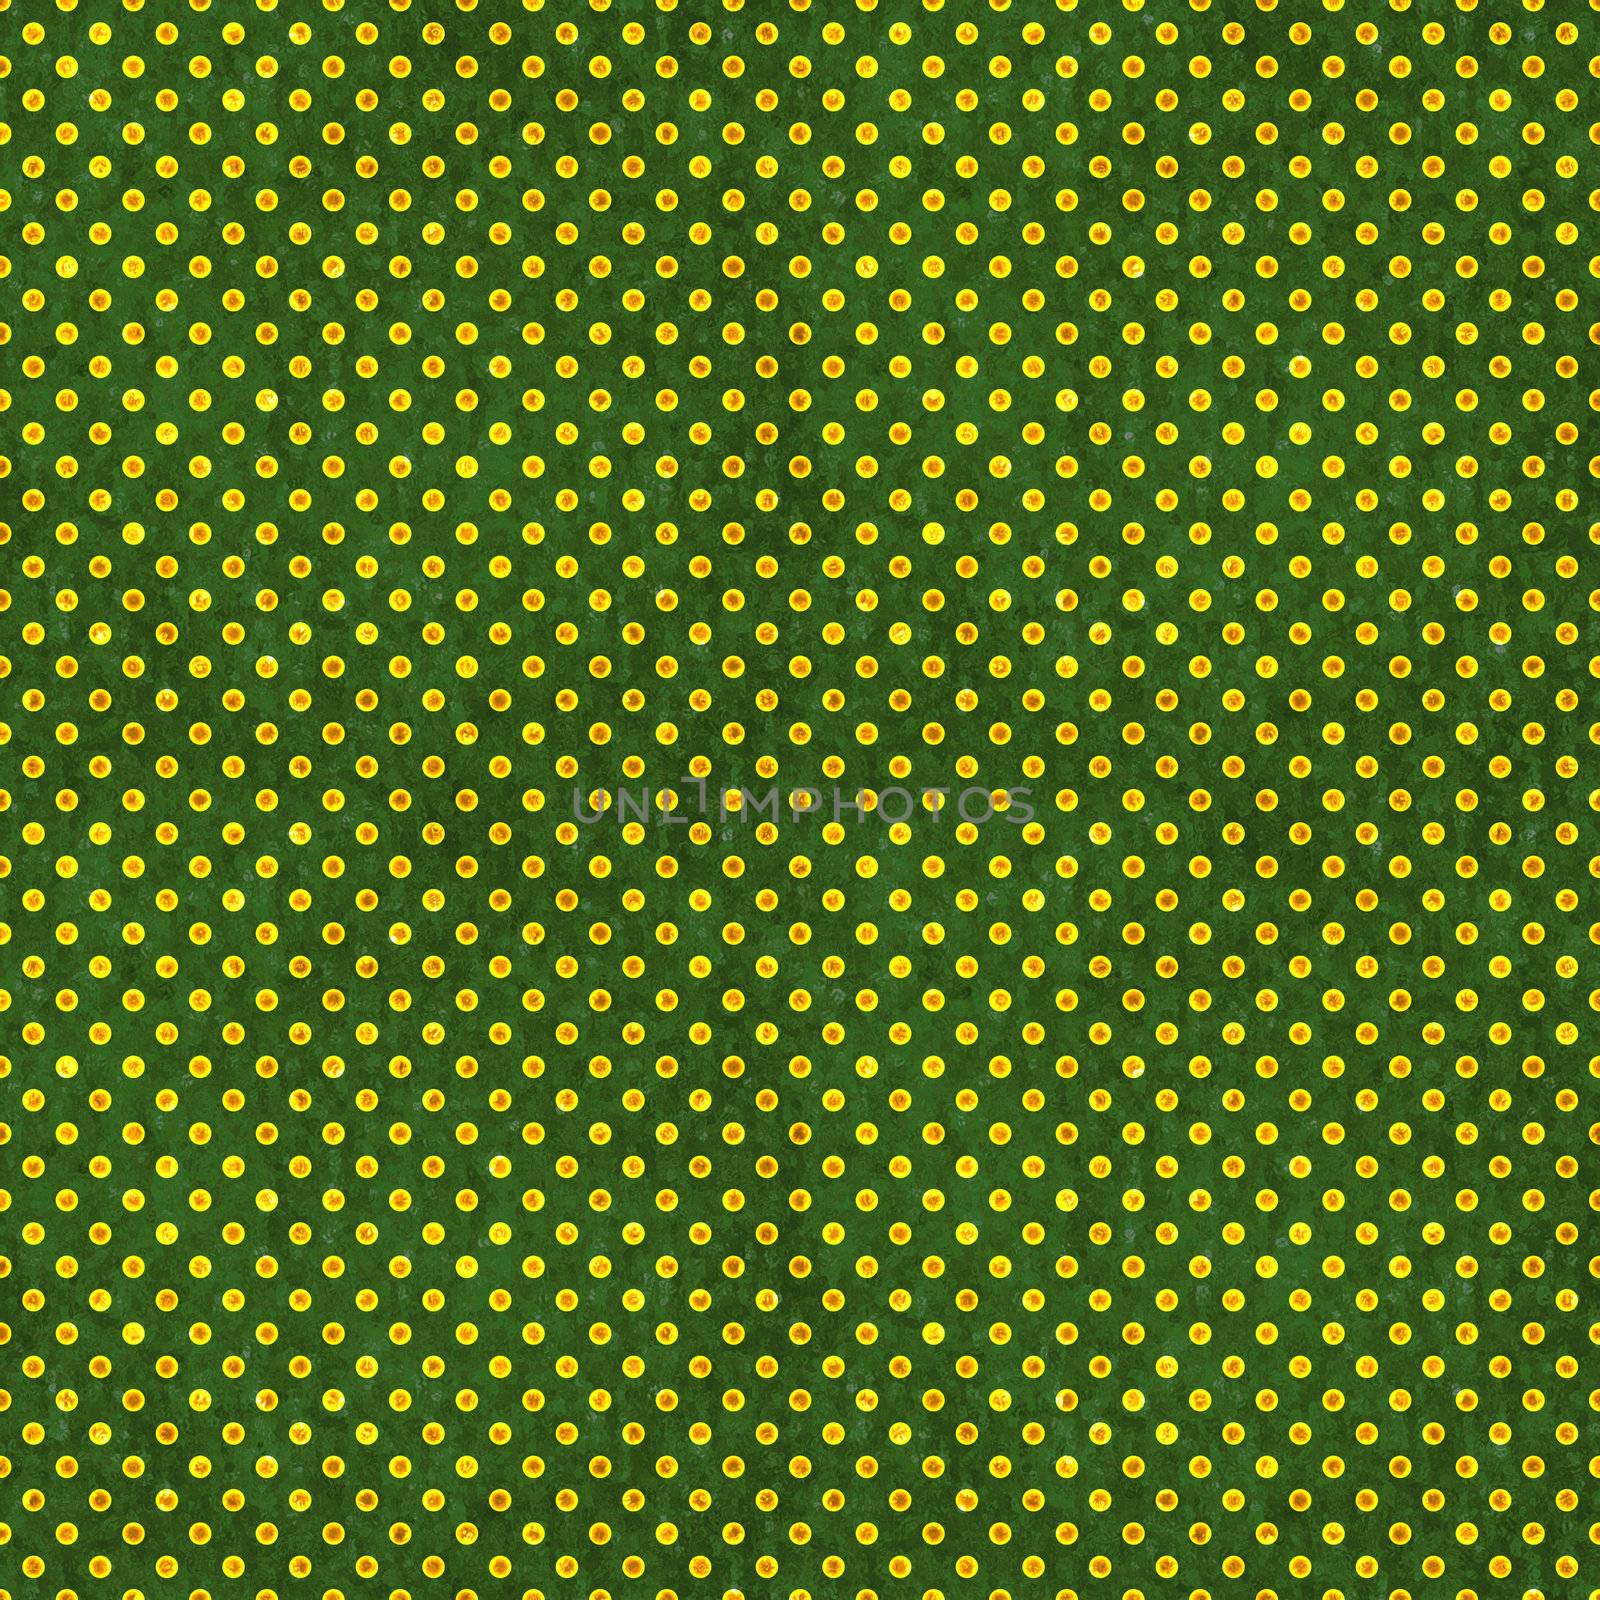 Seamless Green & Gold Polka Dot by SongPixels